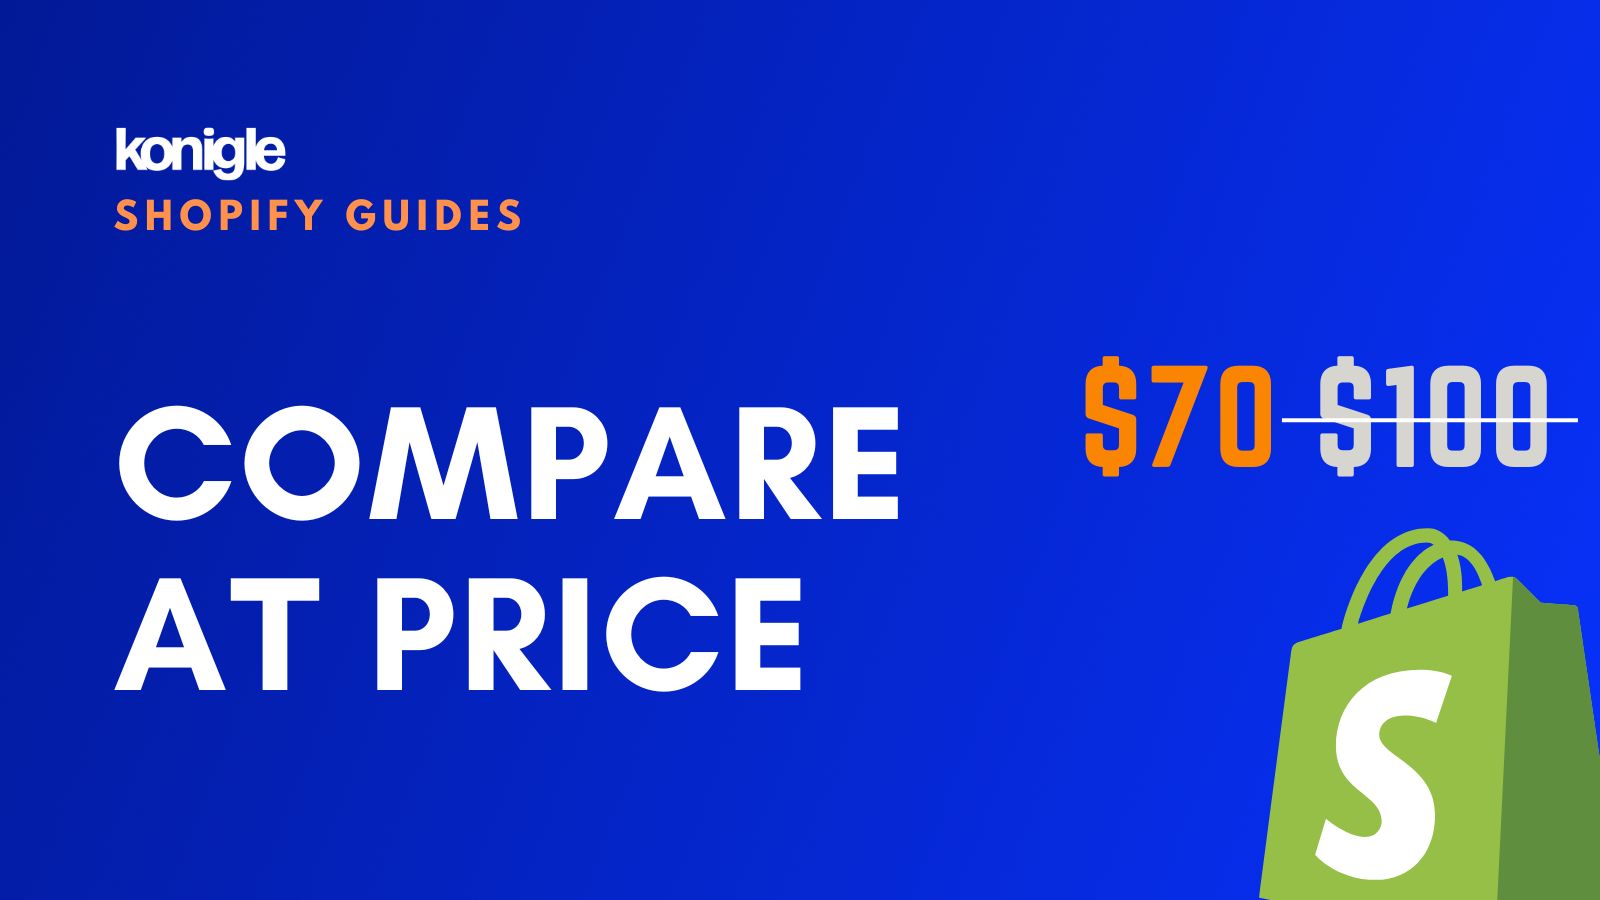 How to use compare at price effectively in Shopify?